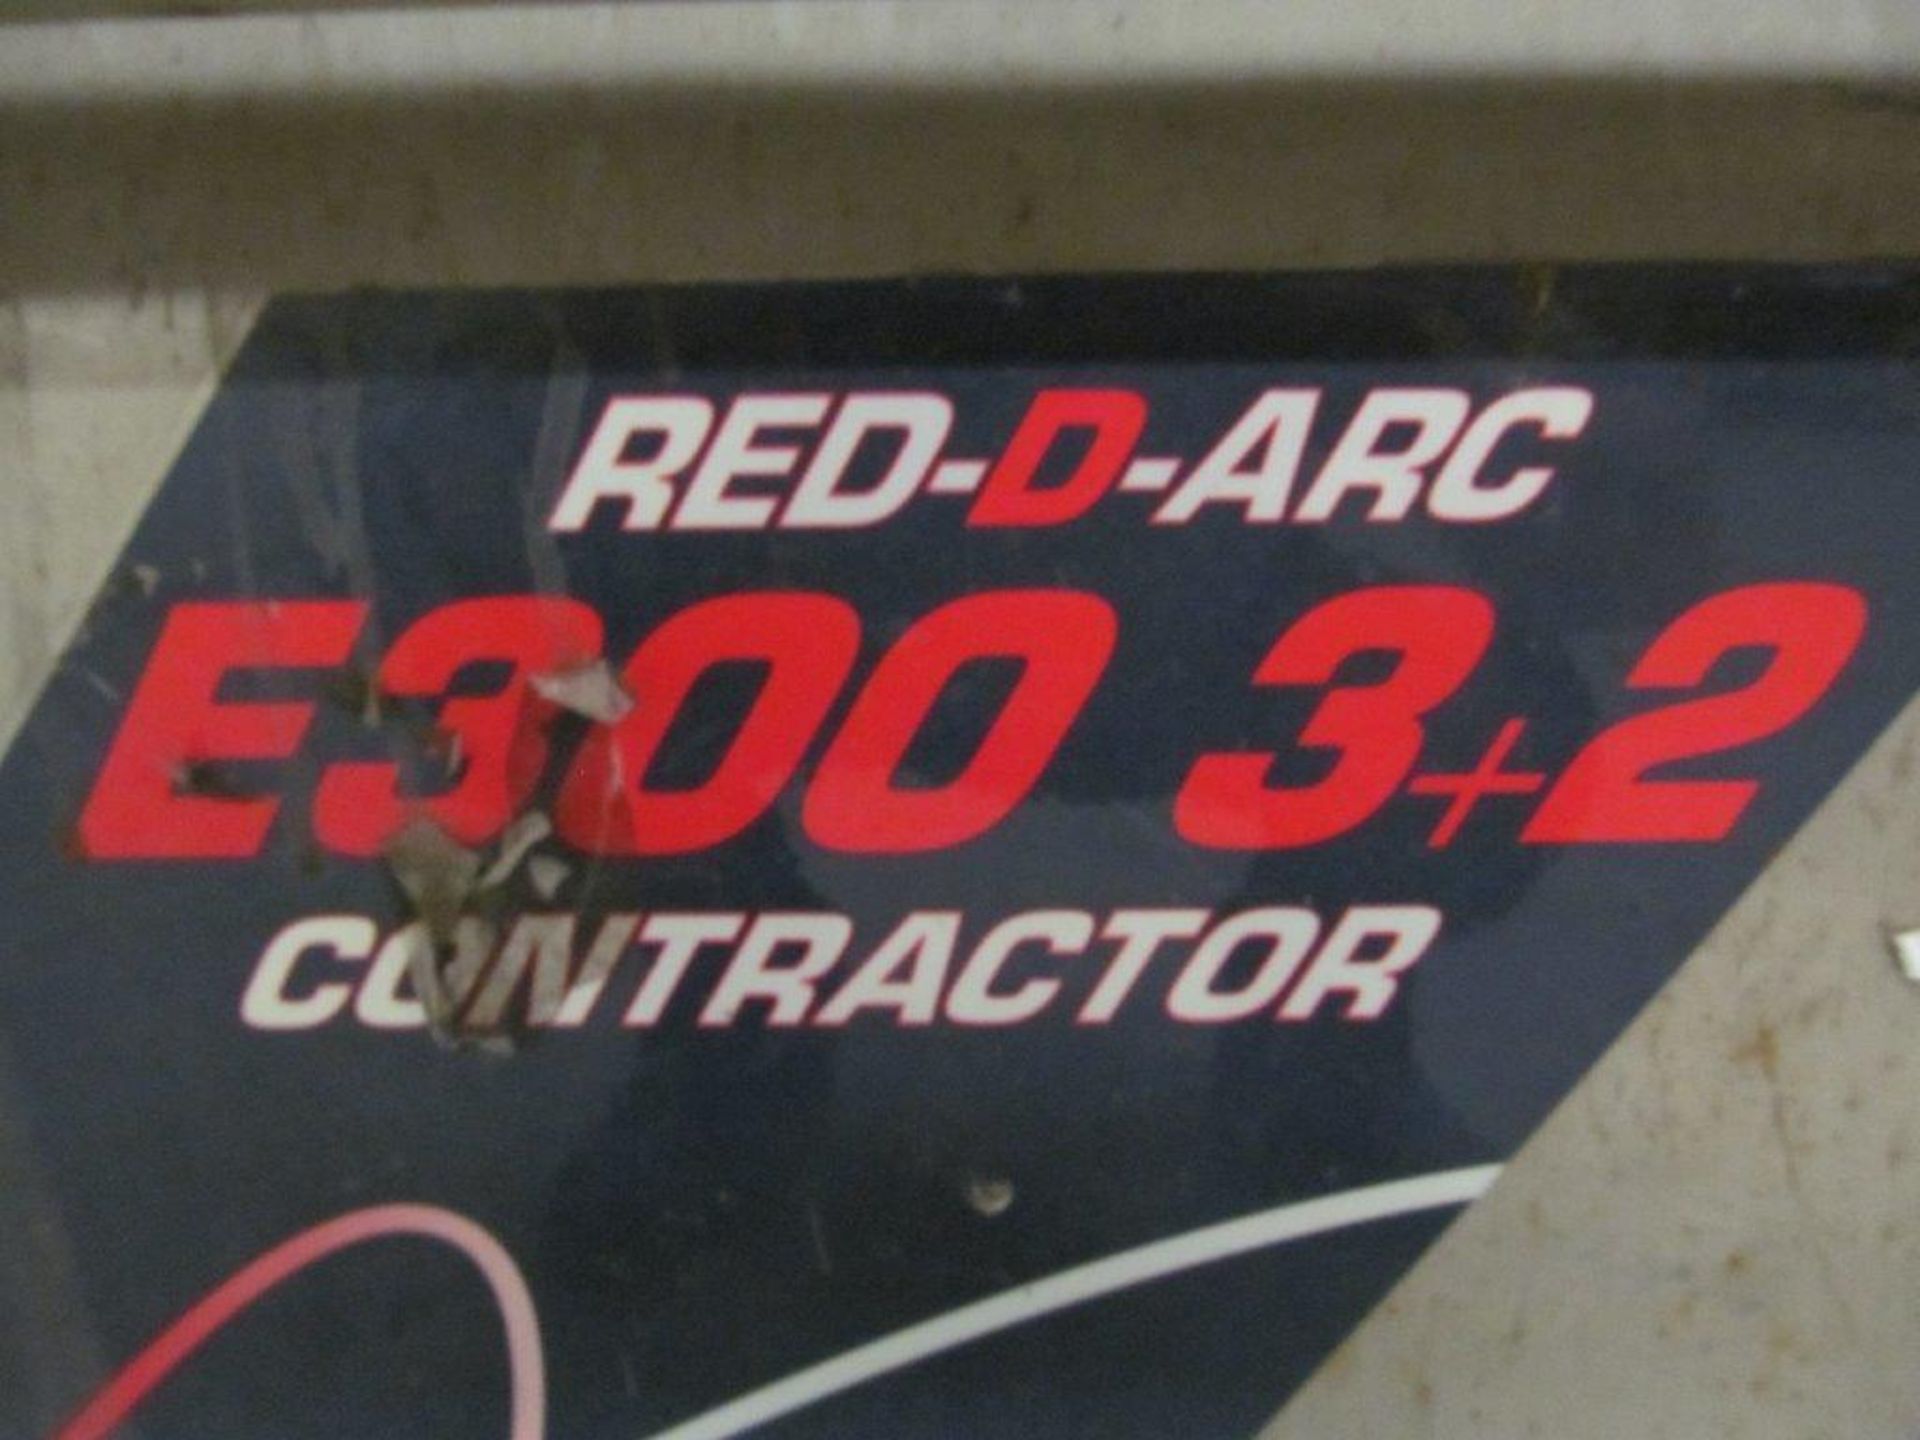 RED-D-ARC E300 3+2 CONTRACTOR WELDER, AC/DC 350 AMPS, ELECTRICS: 600V/3PH/60C - Image 4 of 4